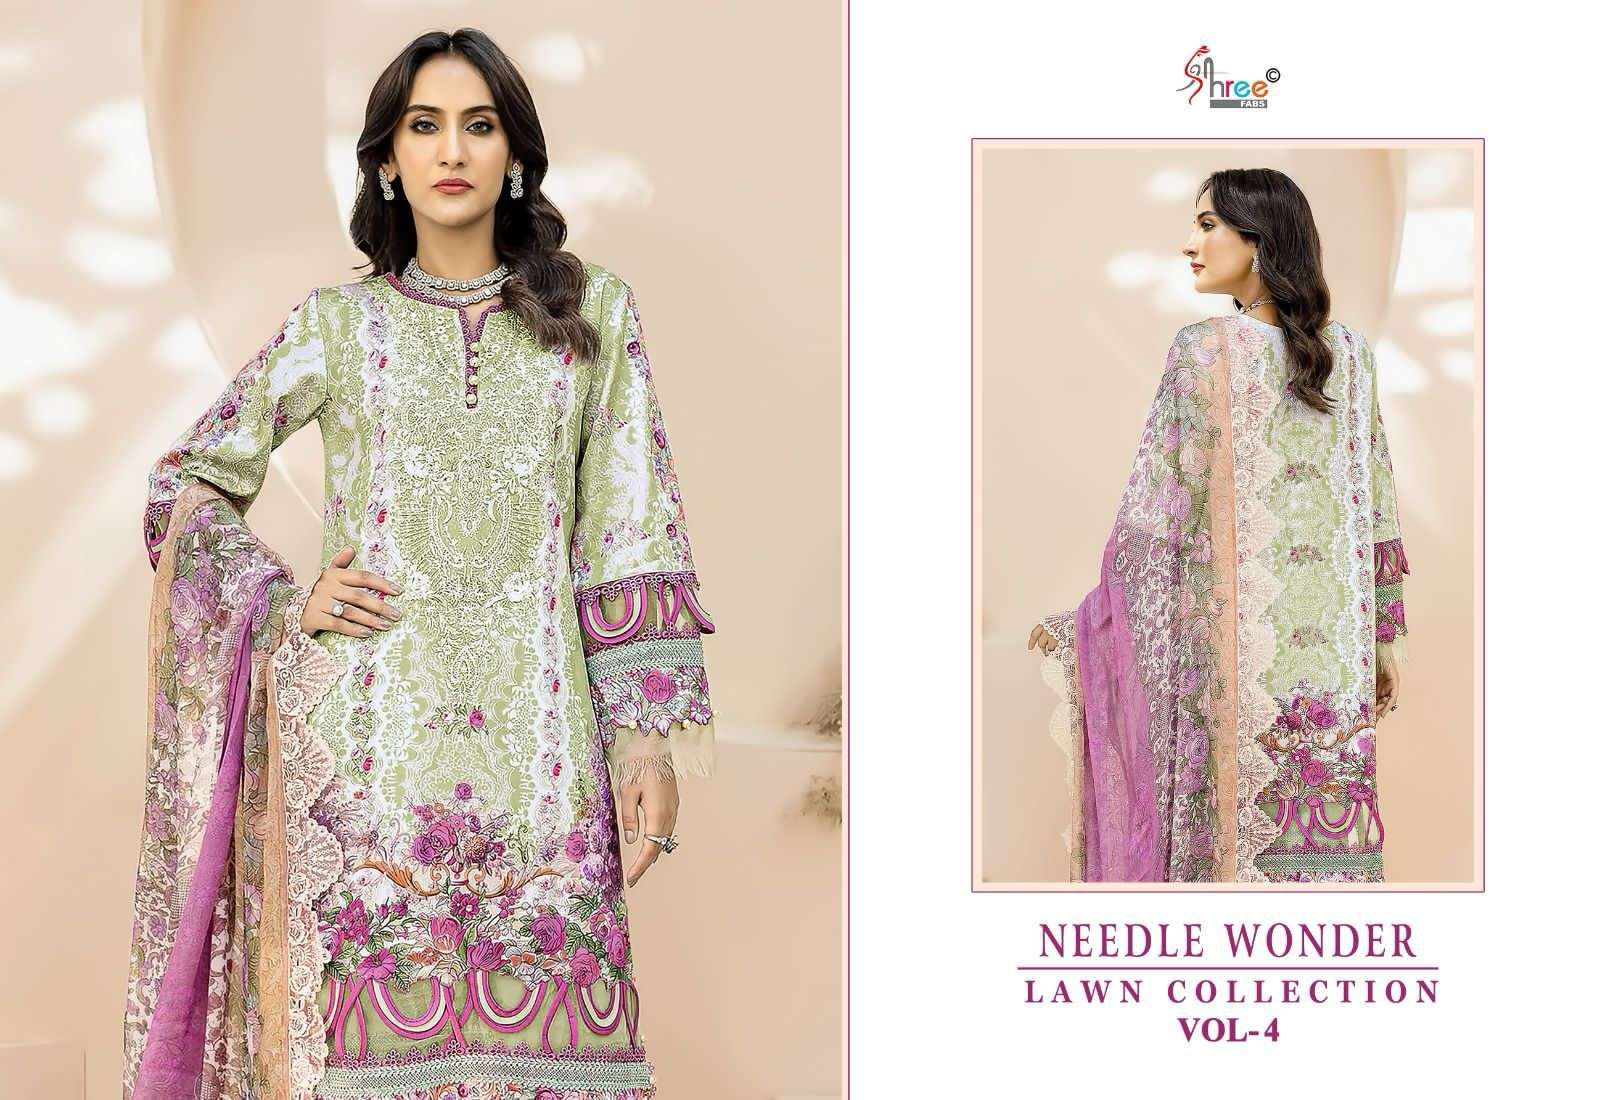 needle wonder lawn collecrion vol-4 shree fabs 3384-3389 series